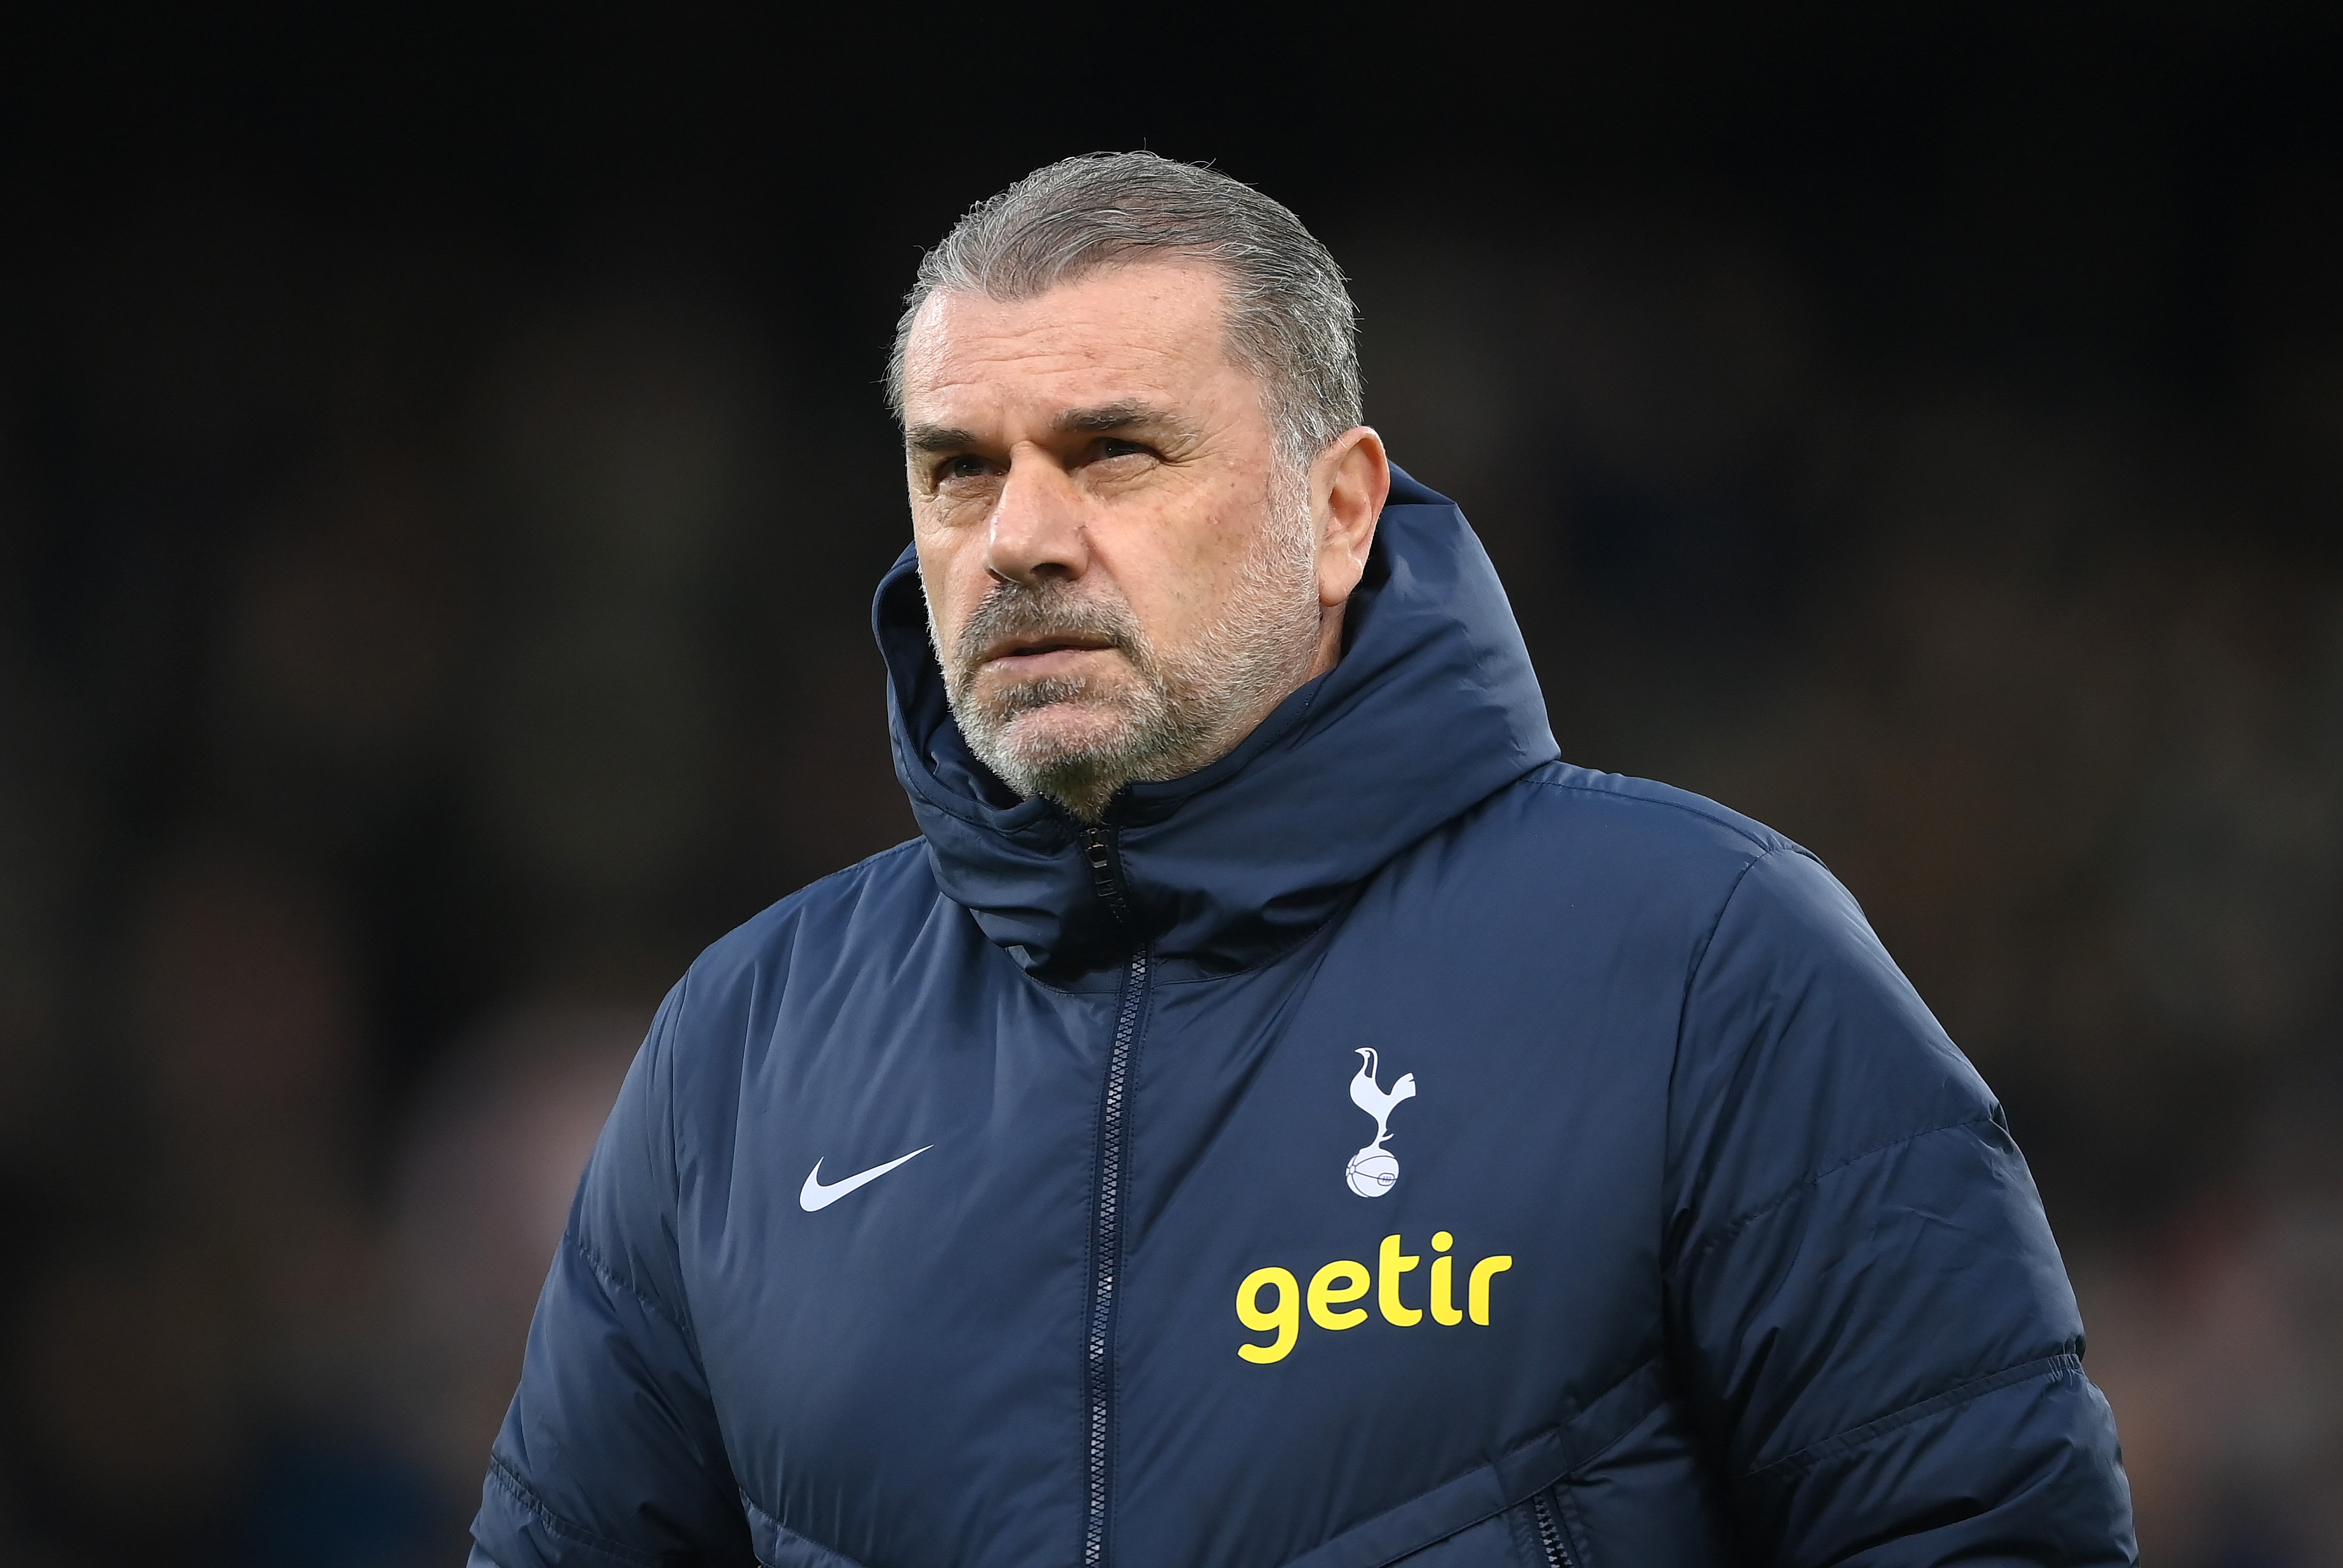 Tottenham Hotspur manager Ange Postecoglou plays down motivation of "ruining" Arsenal's title hopes as real motive revealed.